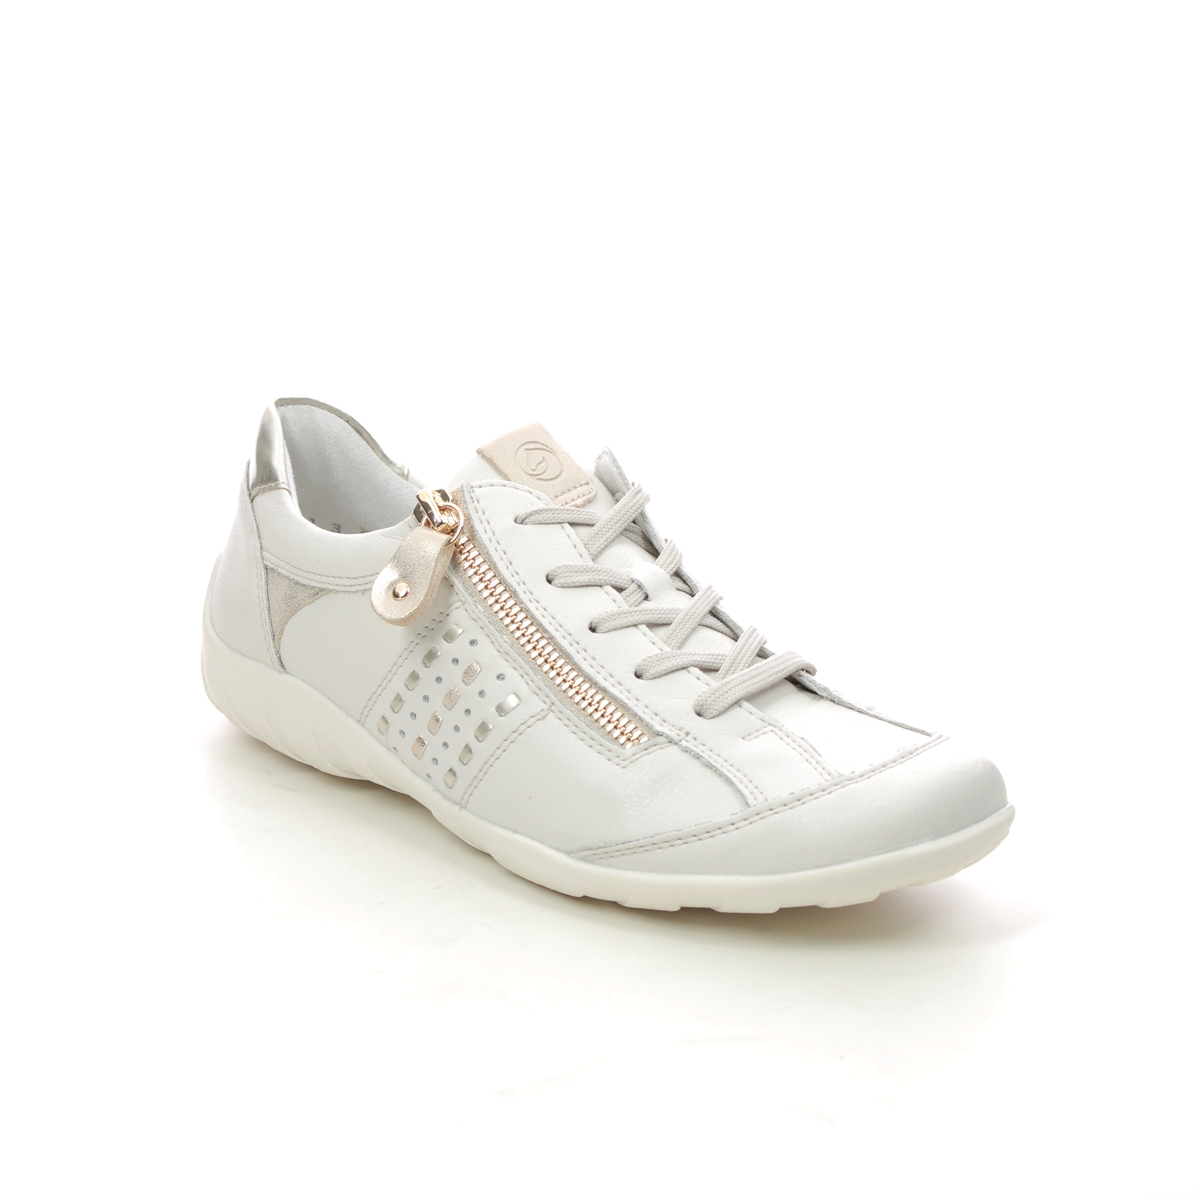 Remonte Livzip 21 Off White Womens Lacing Shoes R3404-81 In Size 42 In Plain Off White